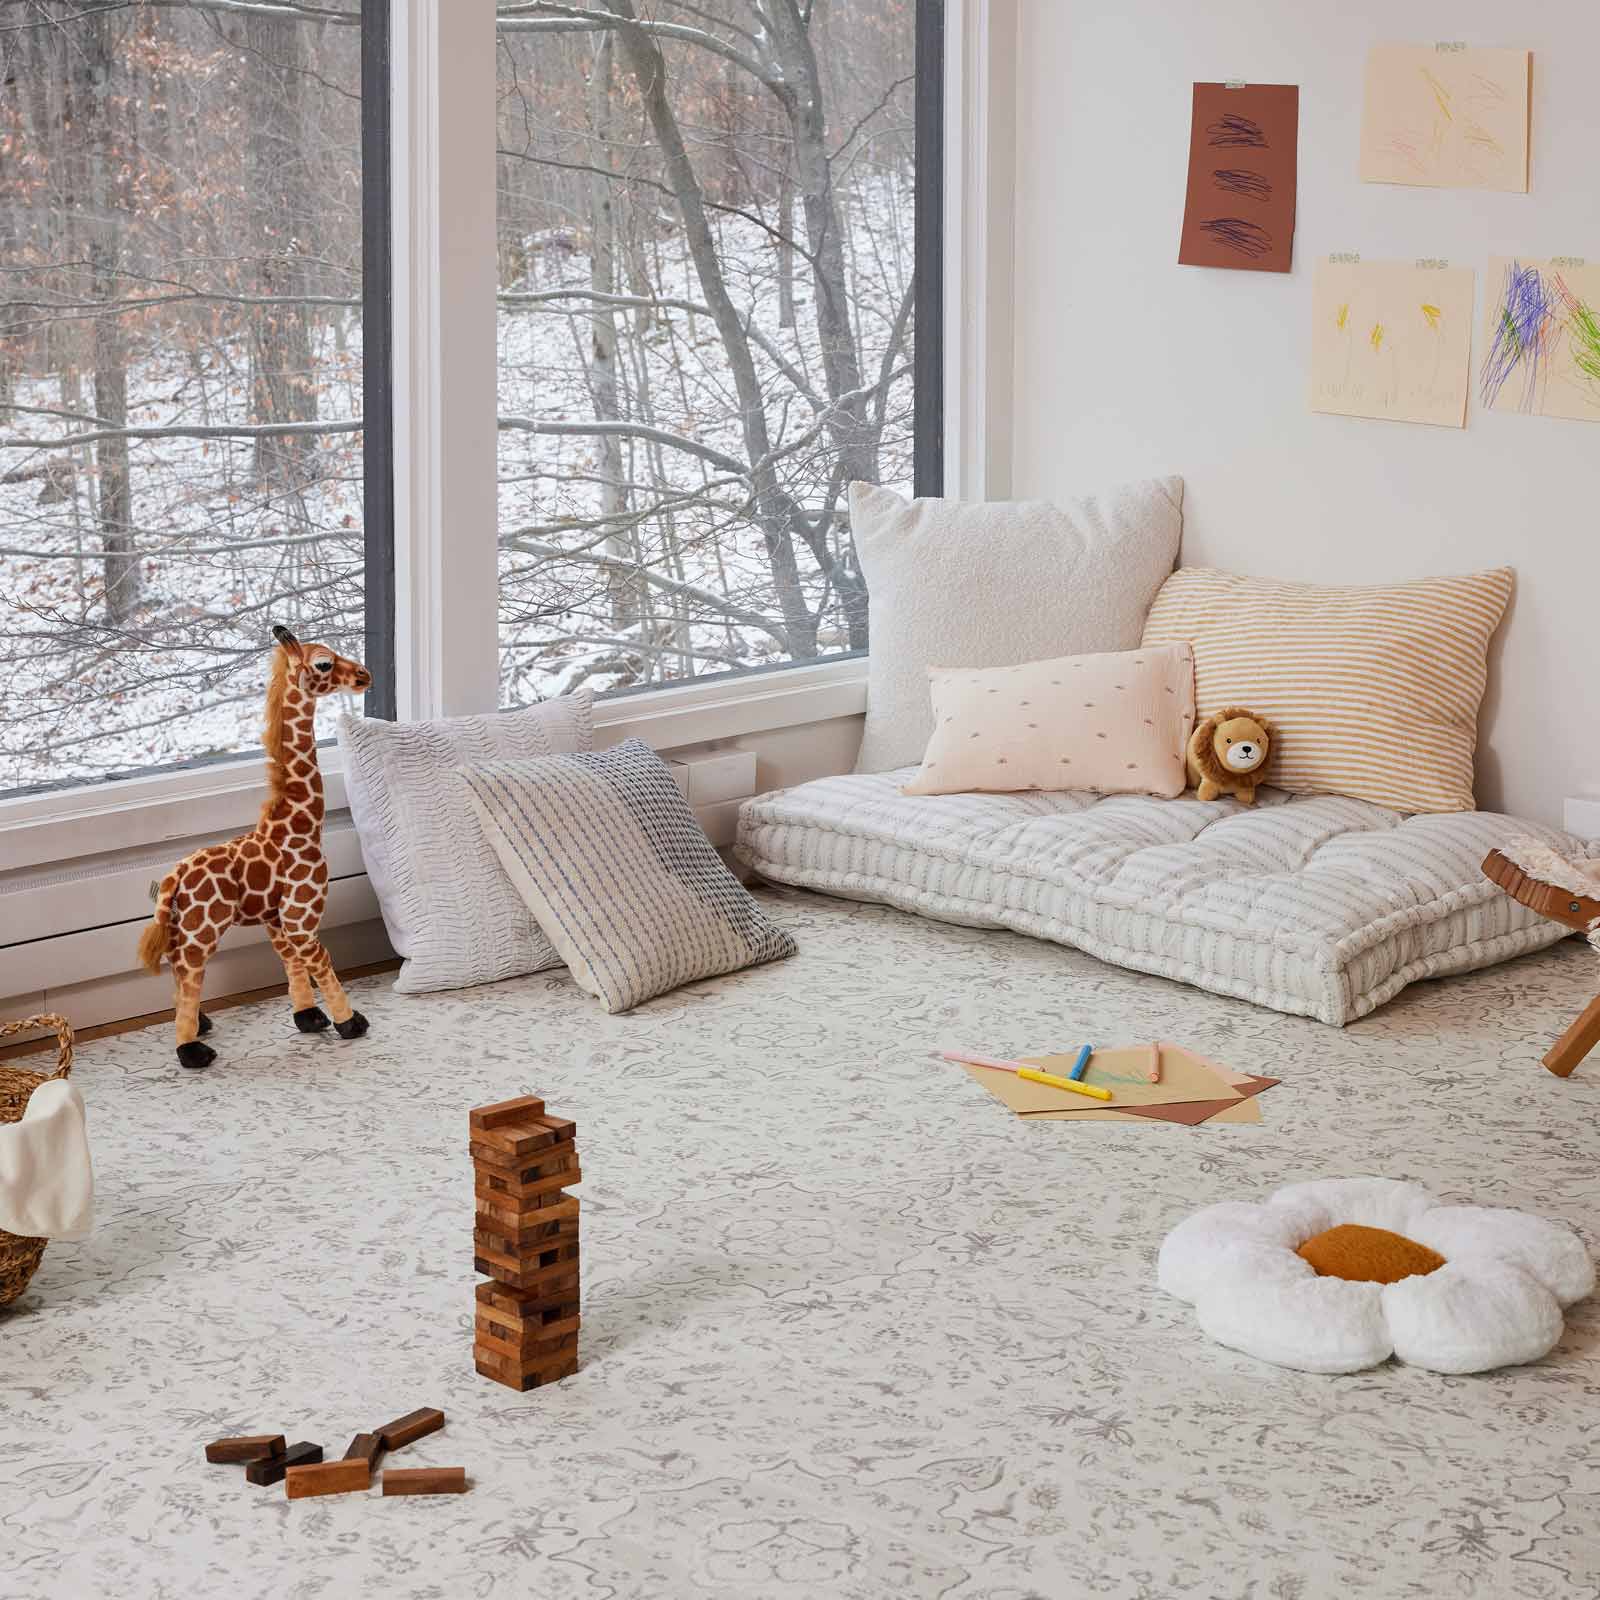 Emile latte neutral floral play mat shown in play room with various toys and pillows on top of the mat